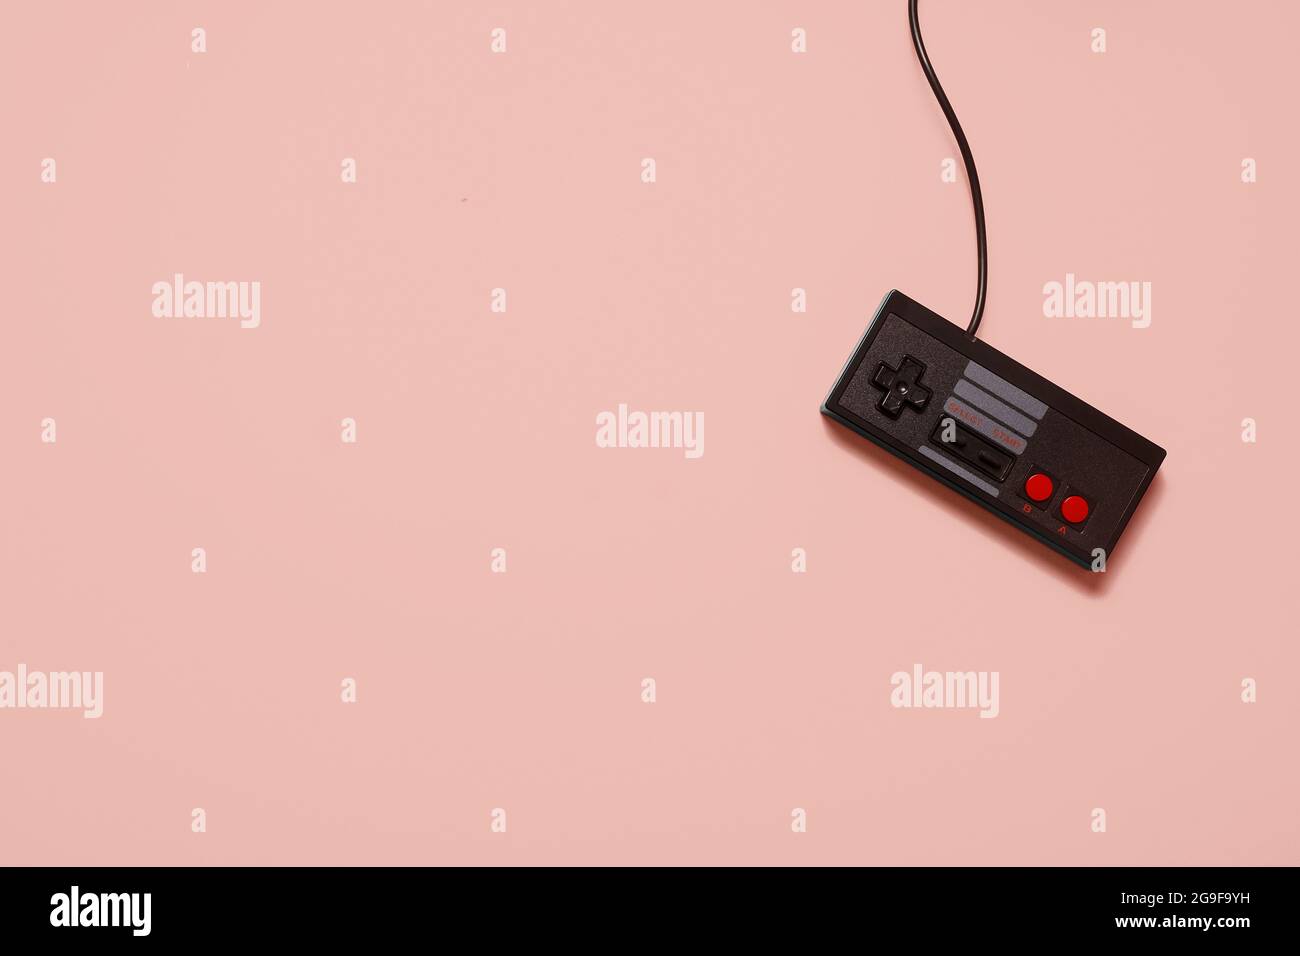 Retro vintage black game console controller on a pastel pink background with copy space and room for text. Stock Photo